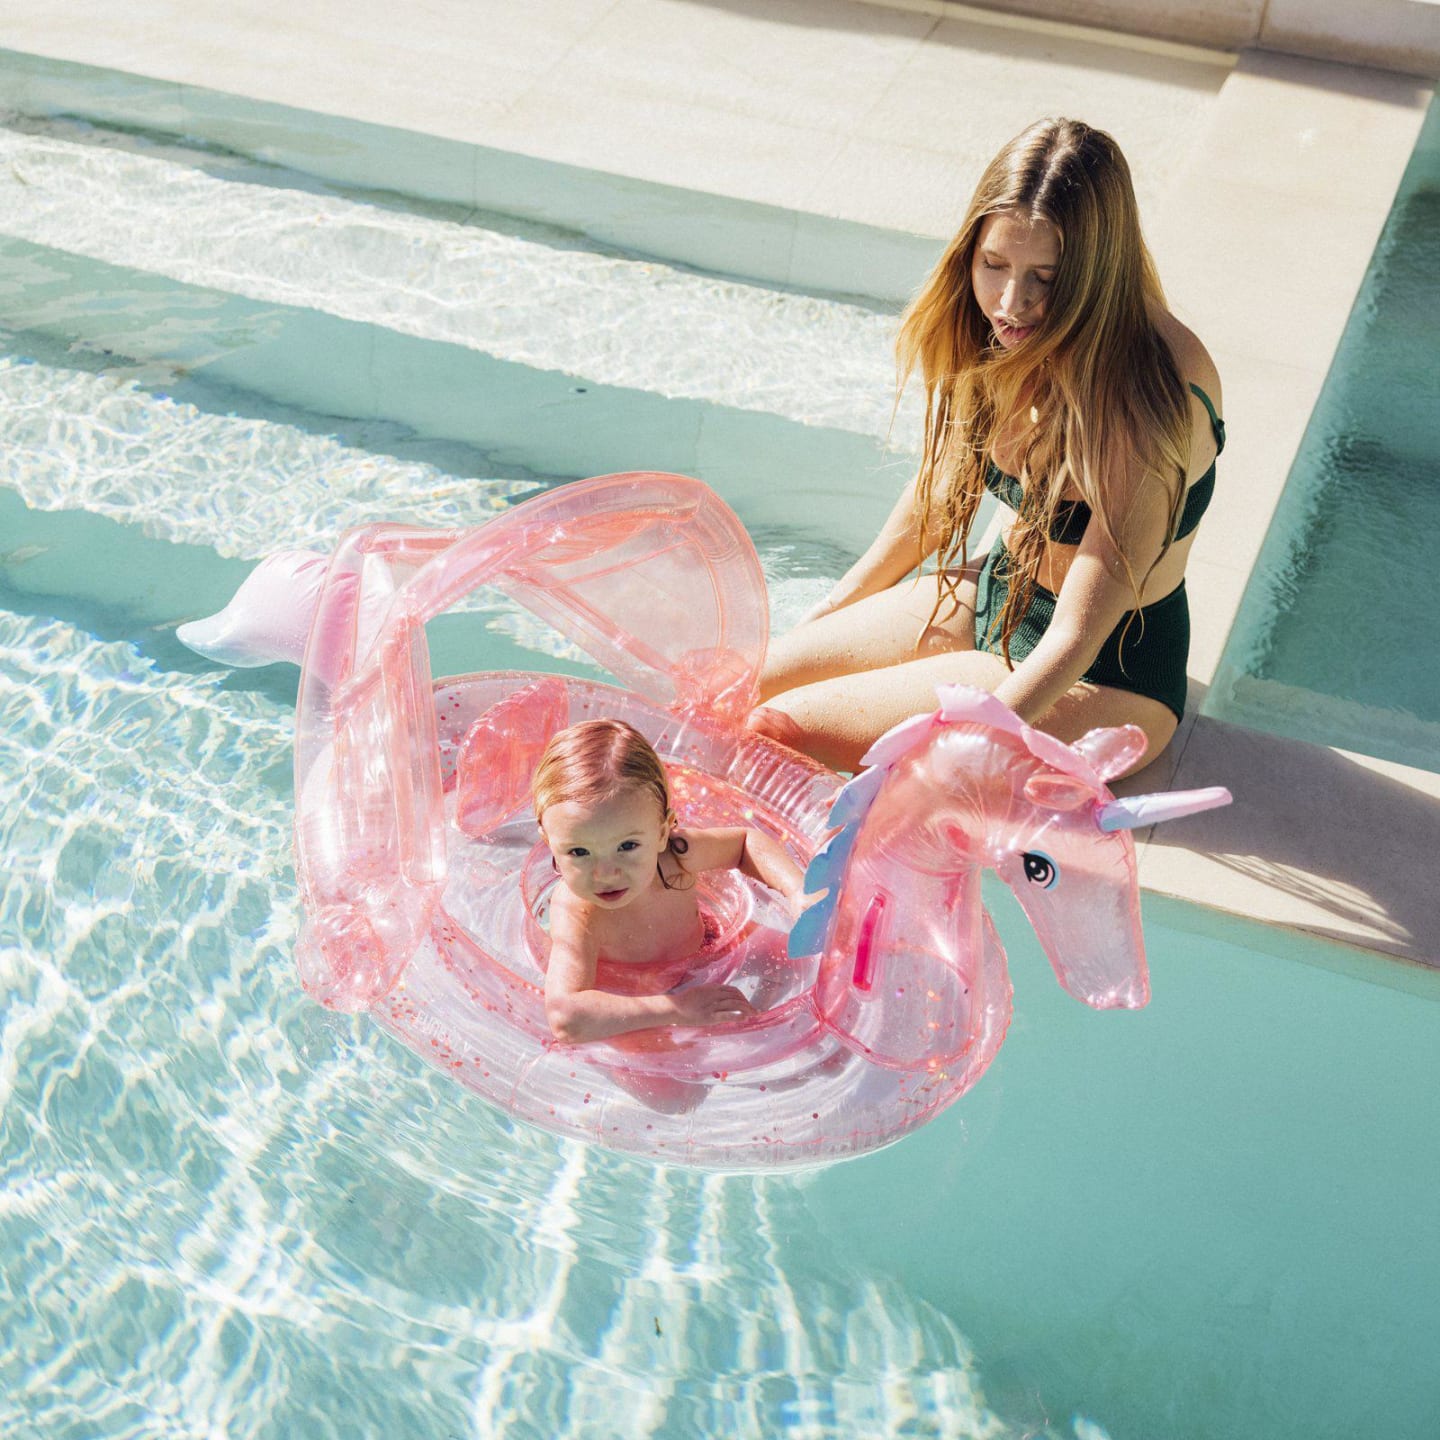 mom and child playing with inflatable pool toy